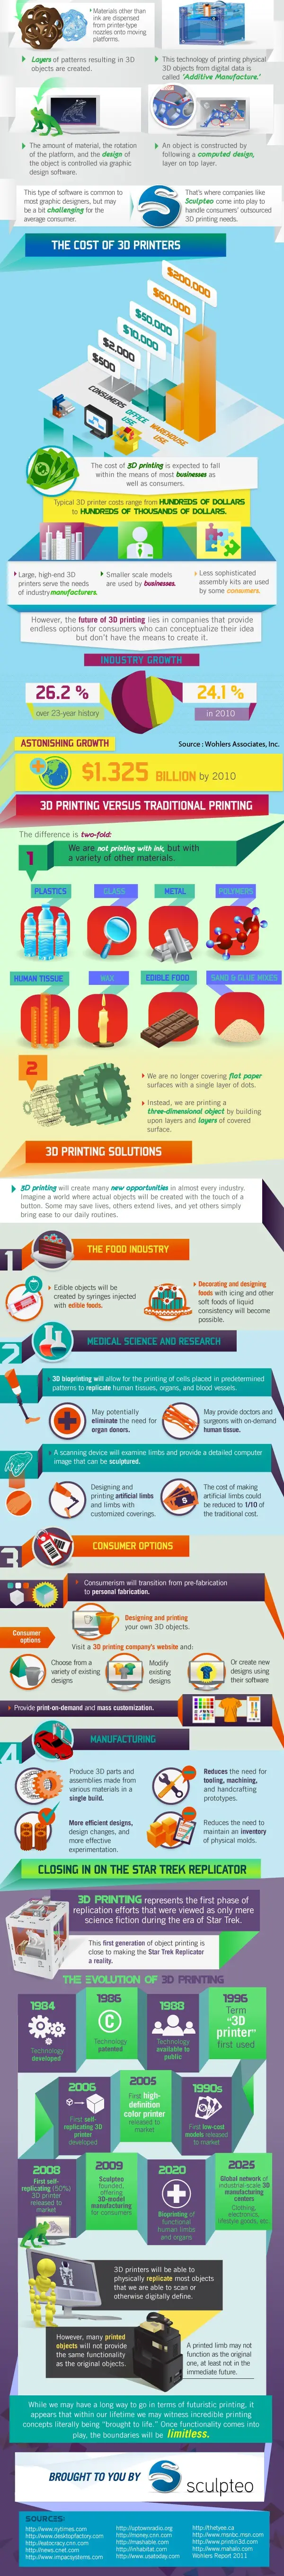 3D Printing Infographic 